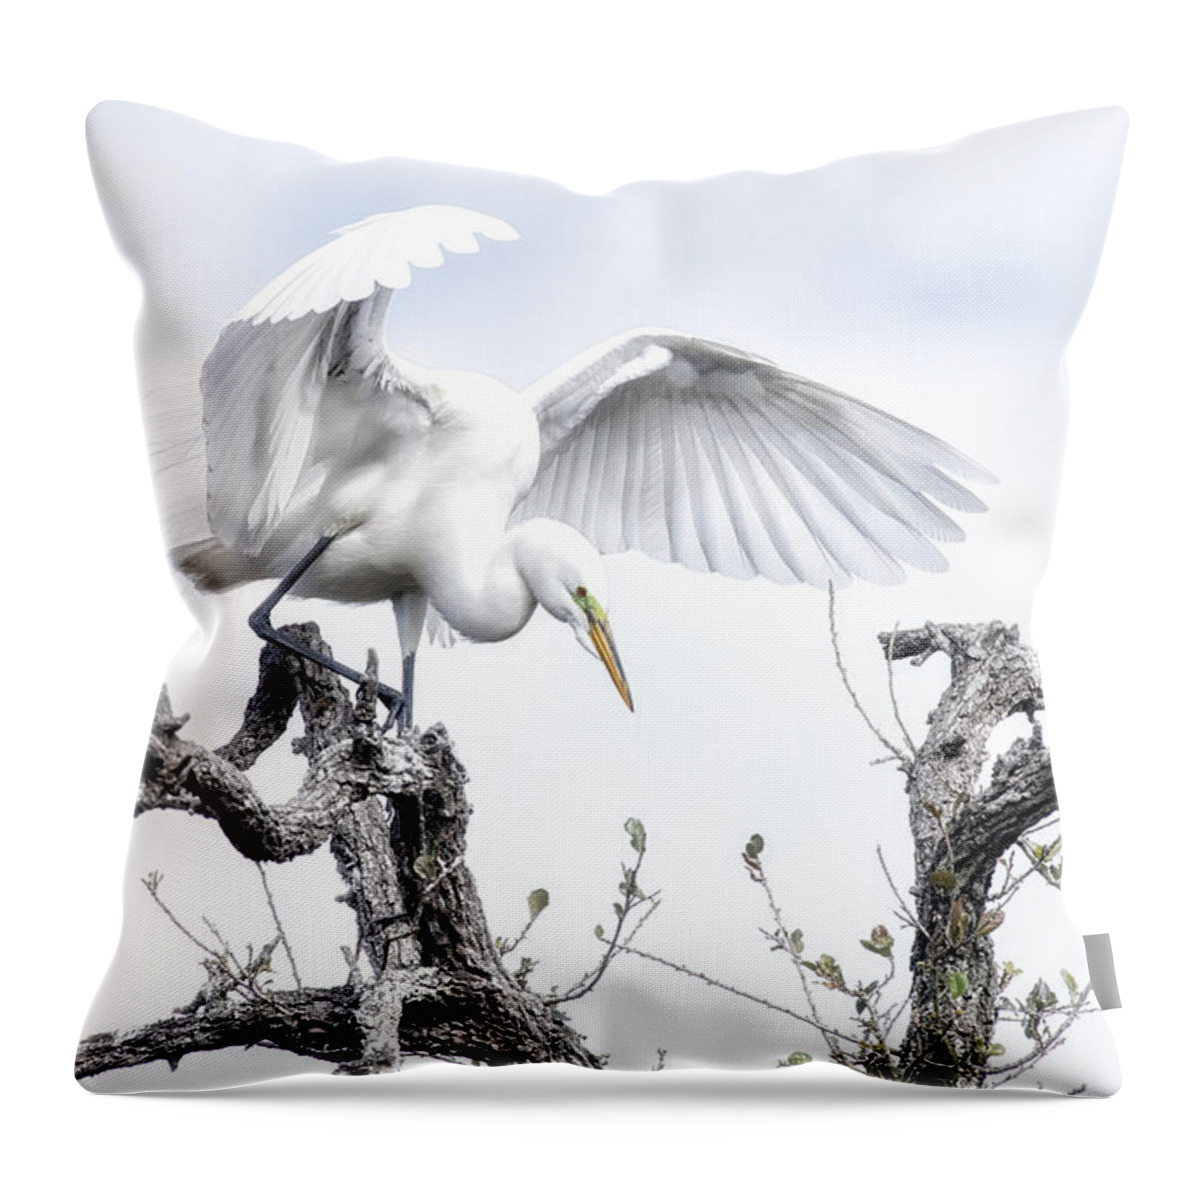 Crystal Yingling Throw Pillow featuring the photograph Pre-flight by Ghostwinds Photography